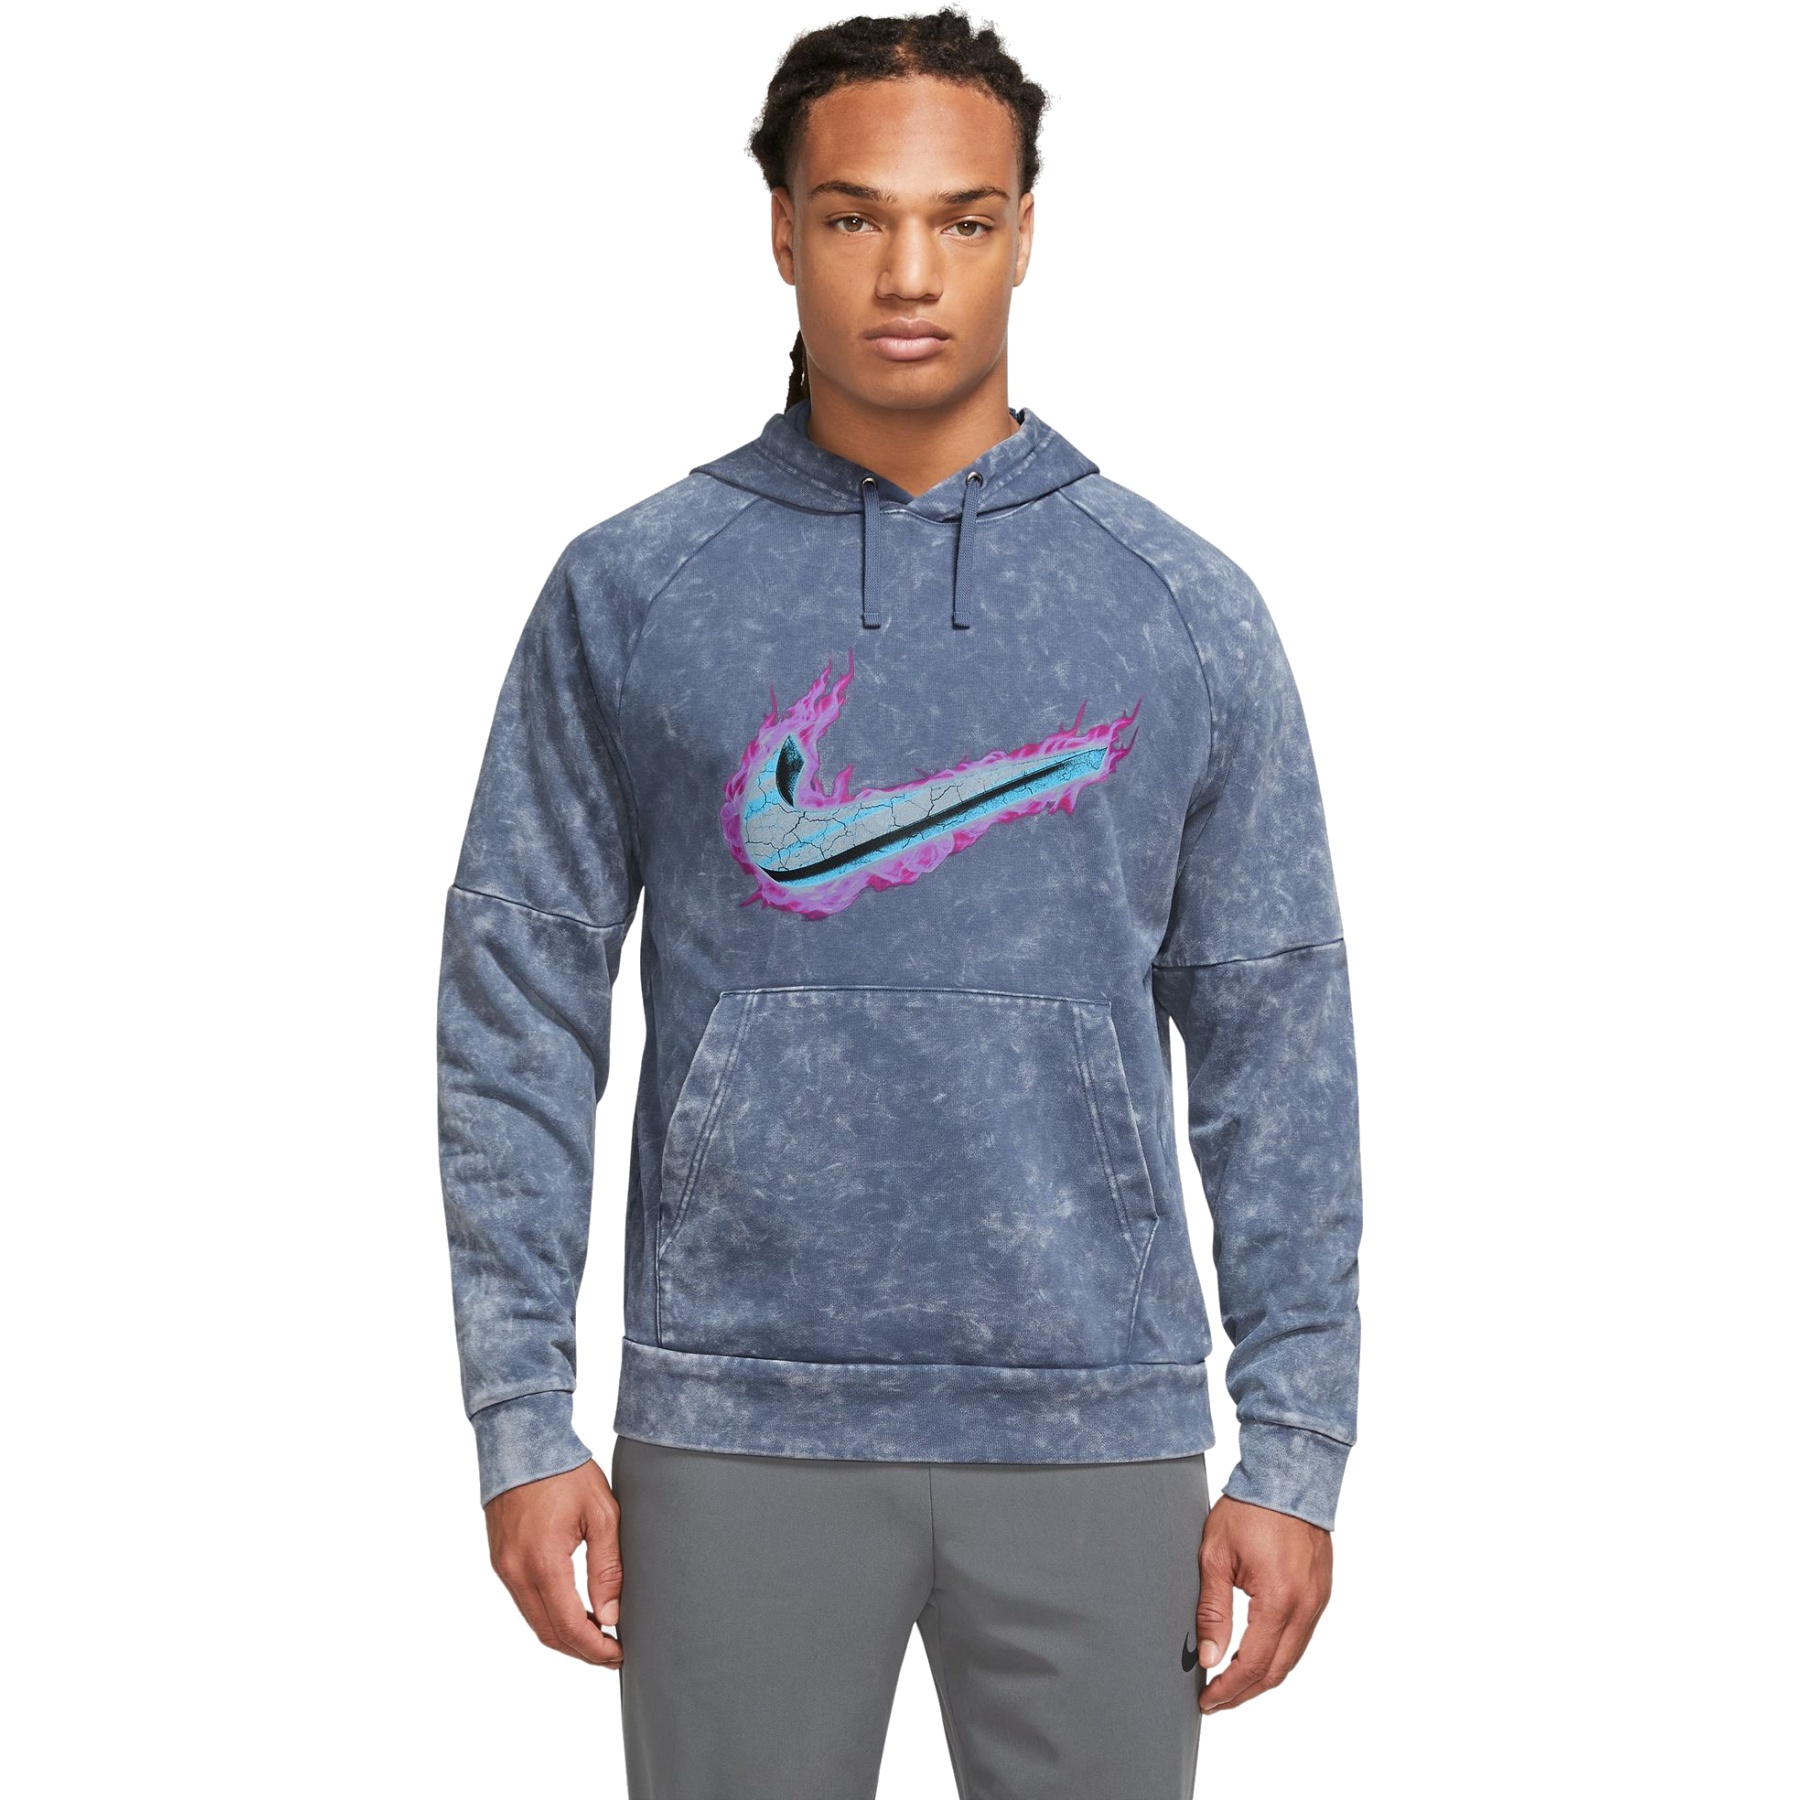 Nike Dri-FIT Fleece Pullover Fitness Hoodie Men - diffused blue DX1555-491